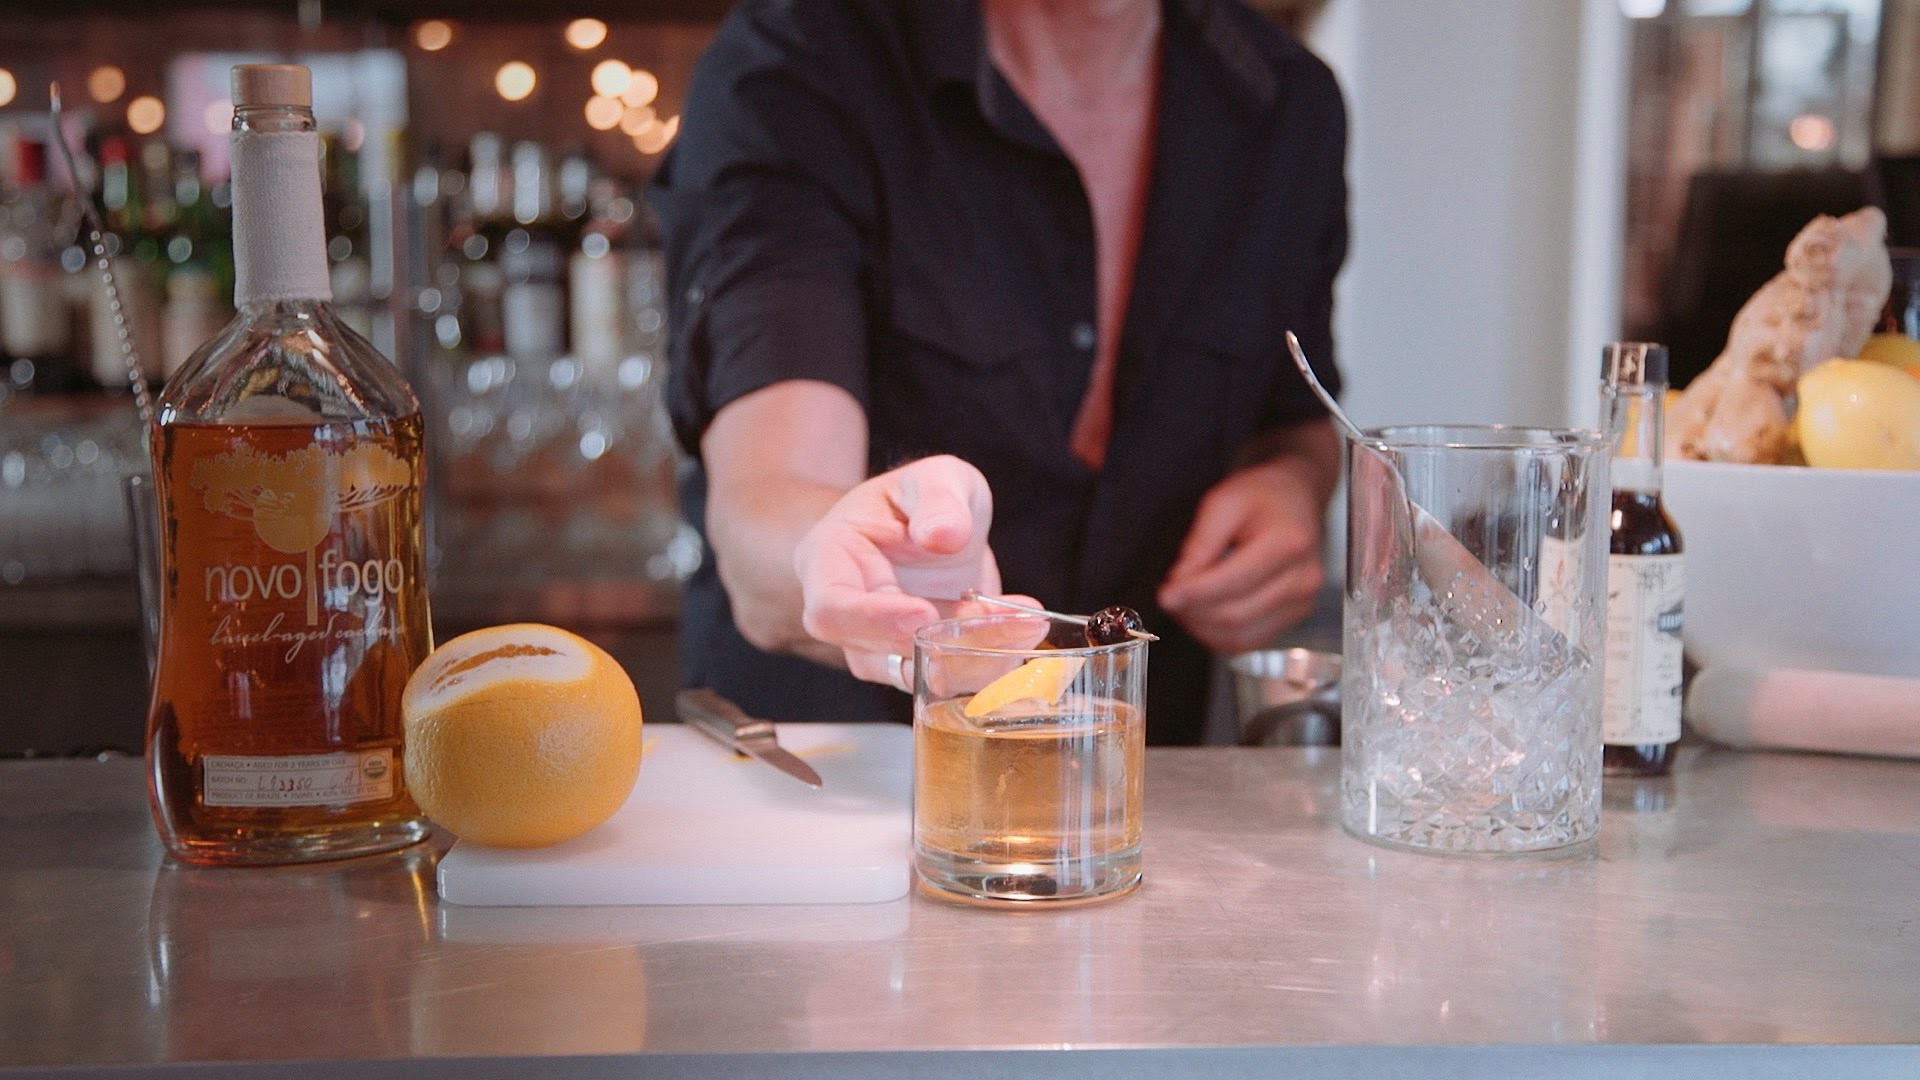 How to Make an Old Fashioned Cocktail with Novo Fogo Barrel-Aged Cachaça